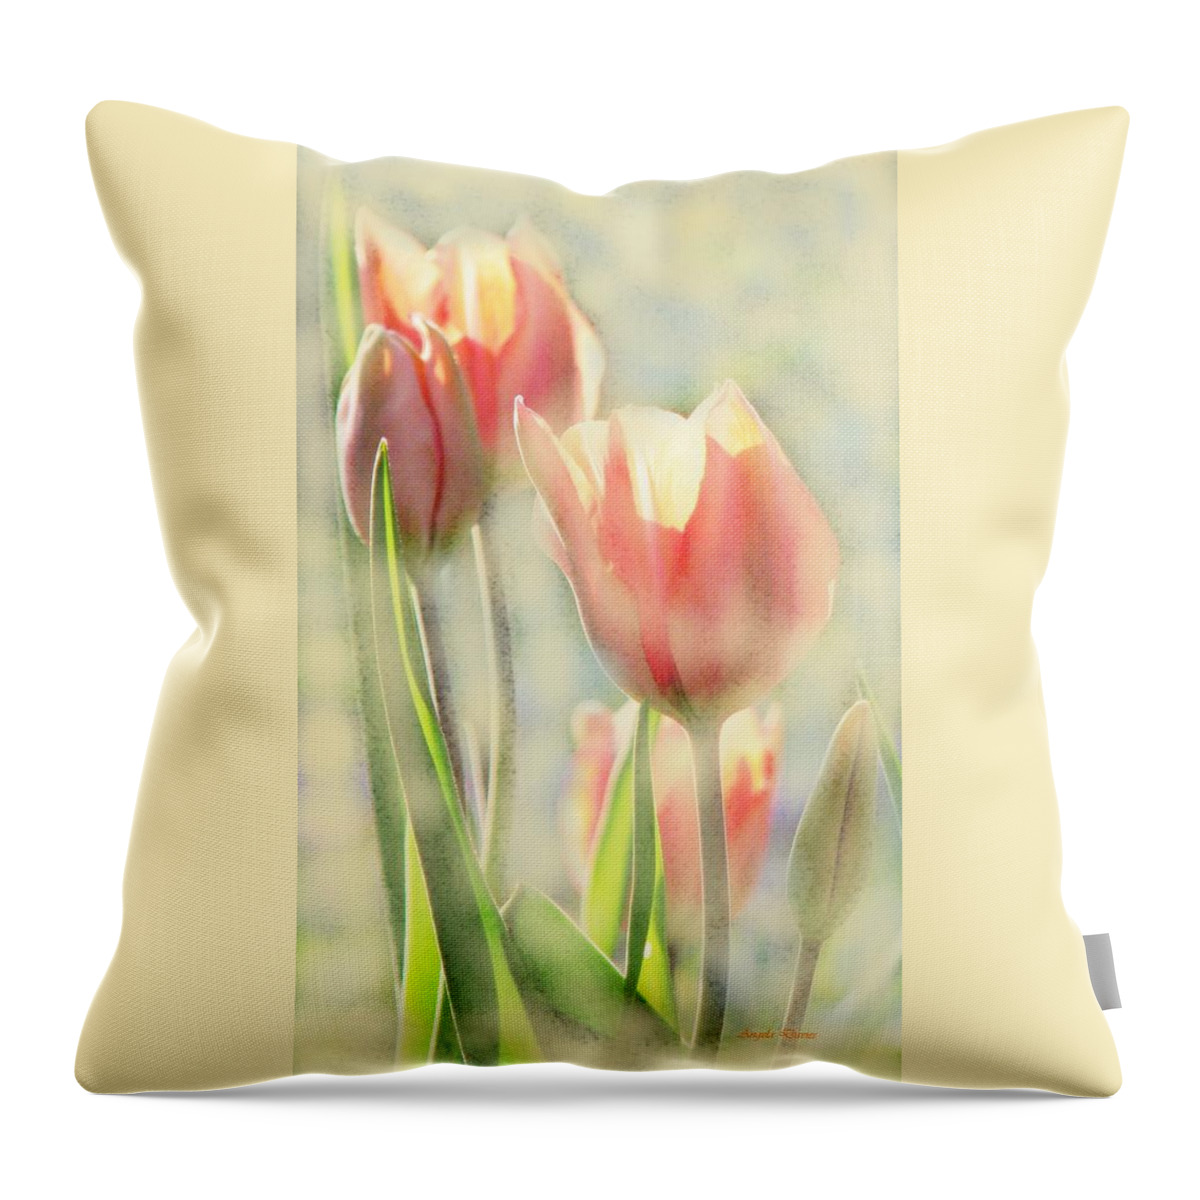 Tulips Throw Pillow featuring the photograph The Scent of Tulips by Angela Davies